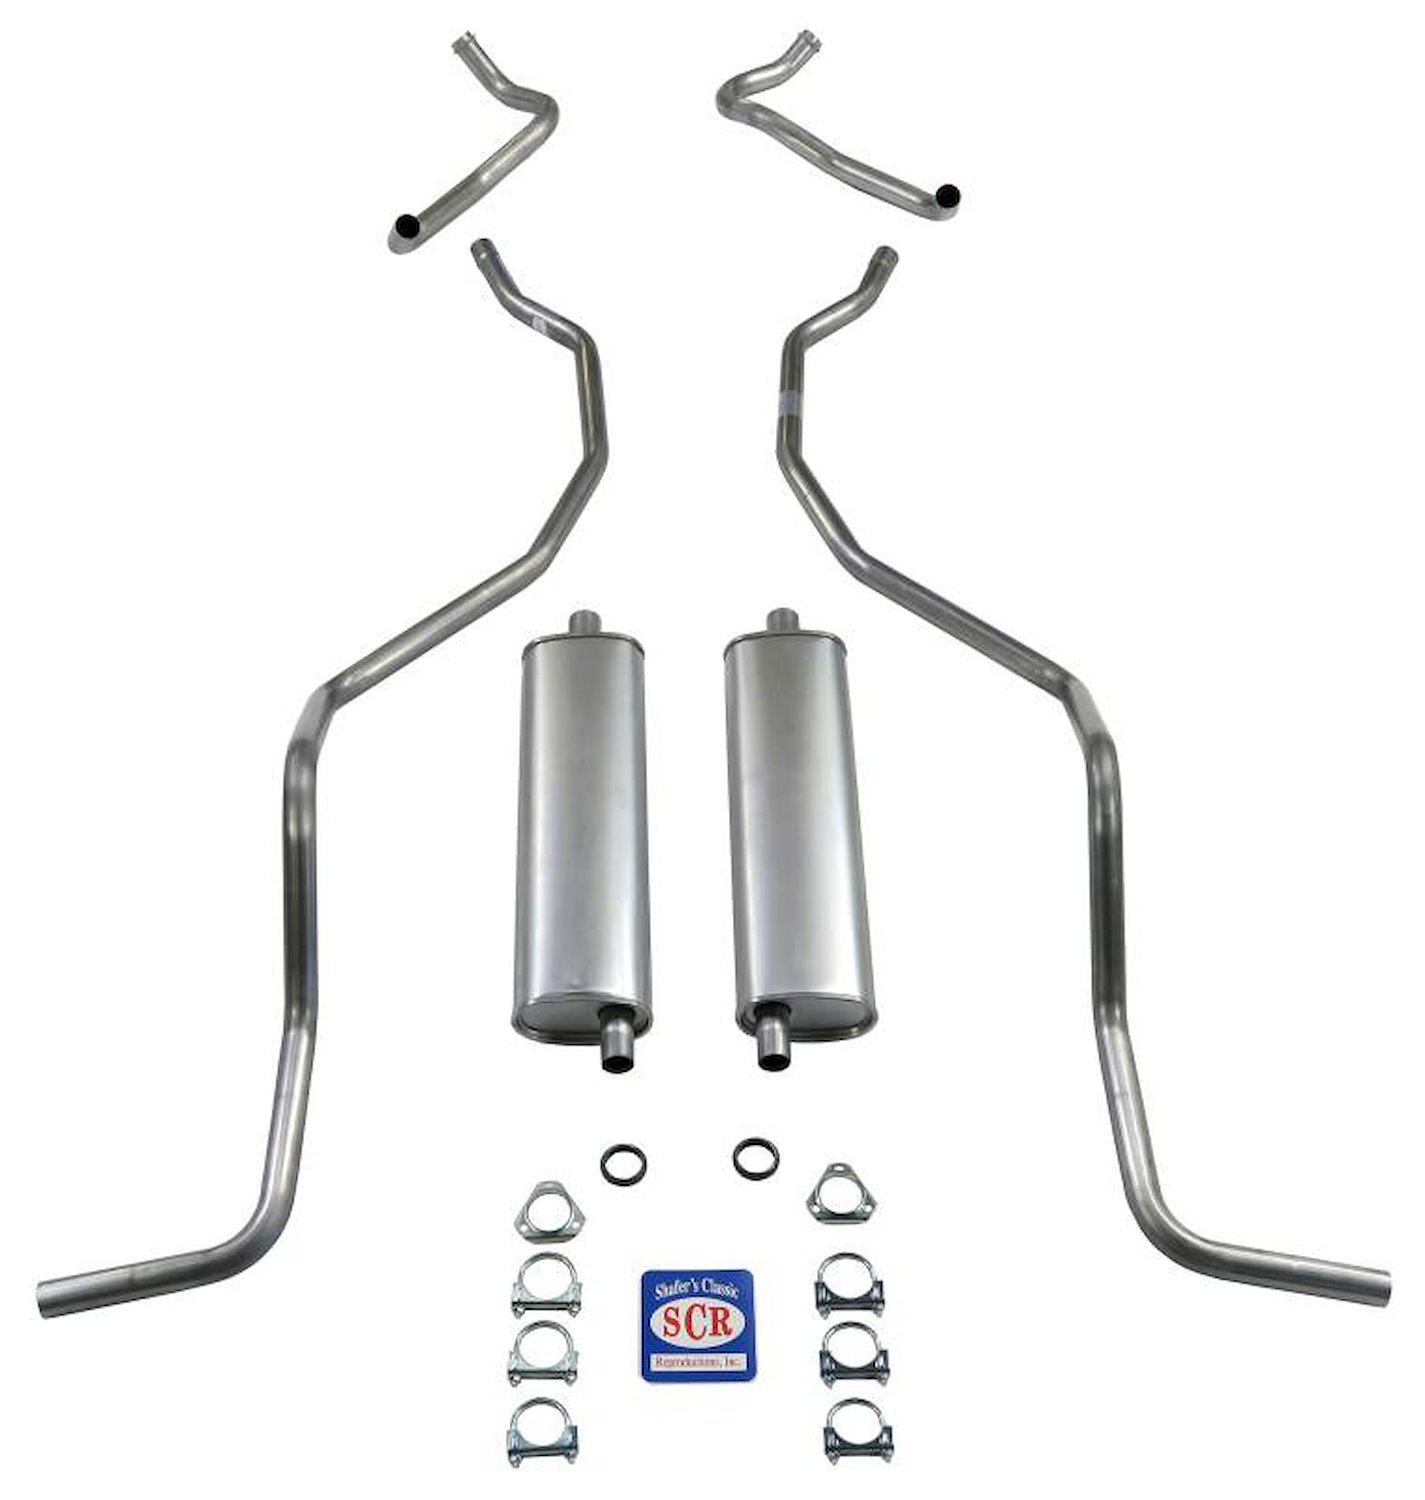 73033 1960-1964 Chevrolet 8-cyl 283 & 327 Dual Exhaust & ONLY 1960 El Camino Exhaust System